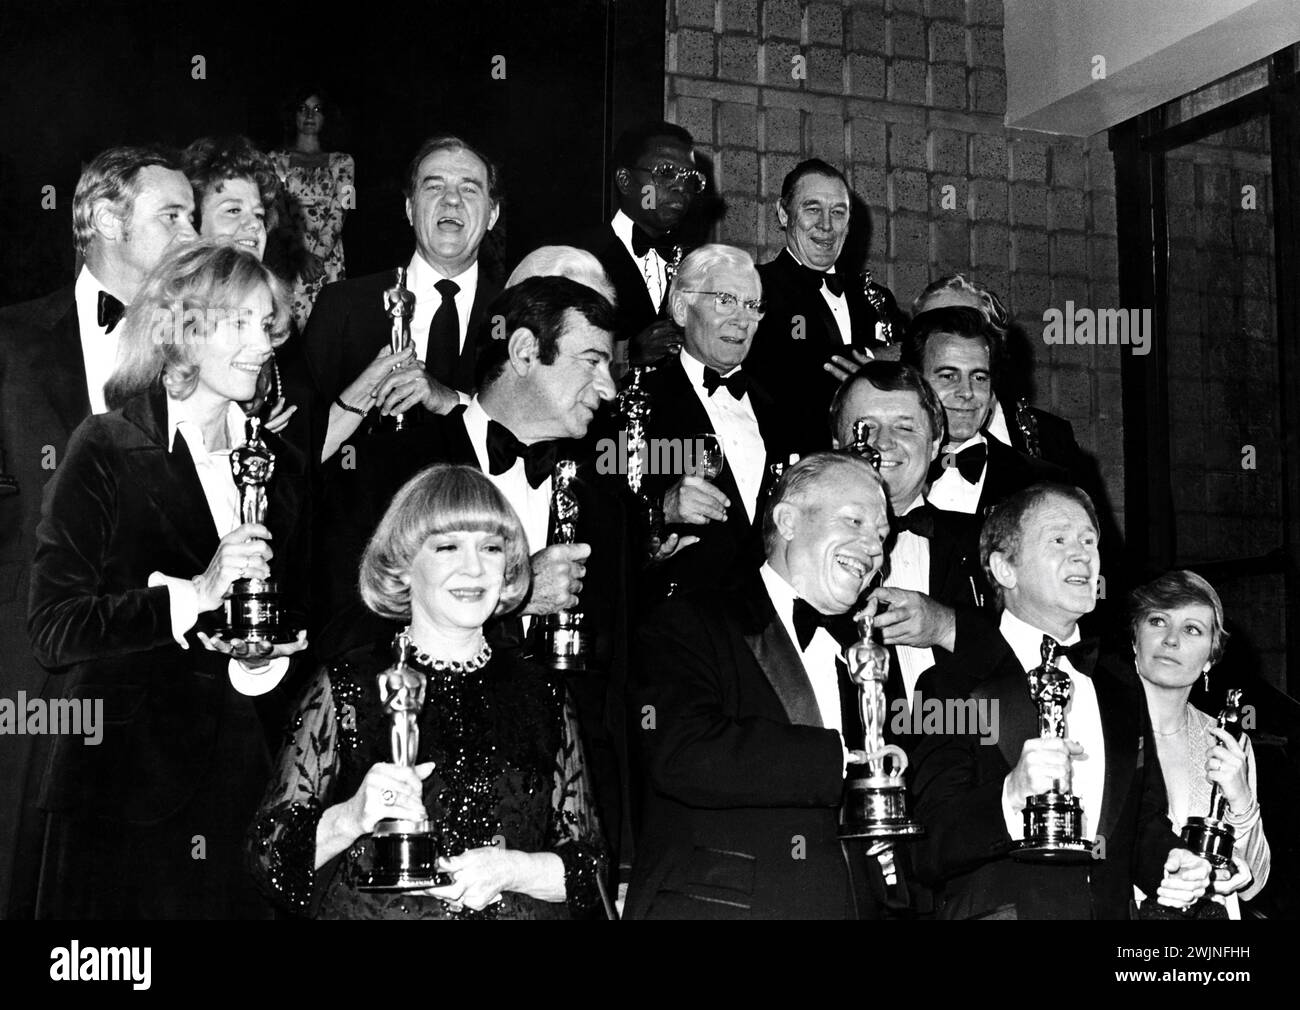 Past Oscar Winners in December 1975 at the opening of new building for the Academy of Motion Picture Arts and Sciences in Los Angeles with from left top row JACK LEMMON SHELLEY WINTERS KARL MALDEN SIDNEY POITIER and BEN JOHNSON middle row EVA MARIE SAINT WALTER MATTHAU GINGER ROGERS (obscured) LAURENCE OLIVIER ROD STEIGER MAXIMILIAN SCHELL and PETER USTINOV (obscured) front row CLAIRE TREVOR HAROLD RUSSELL RED BUTTONS and JOANNE WOODWARD Stock Photo